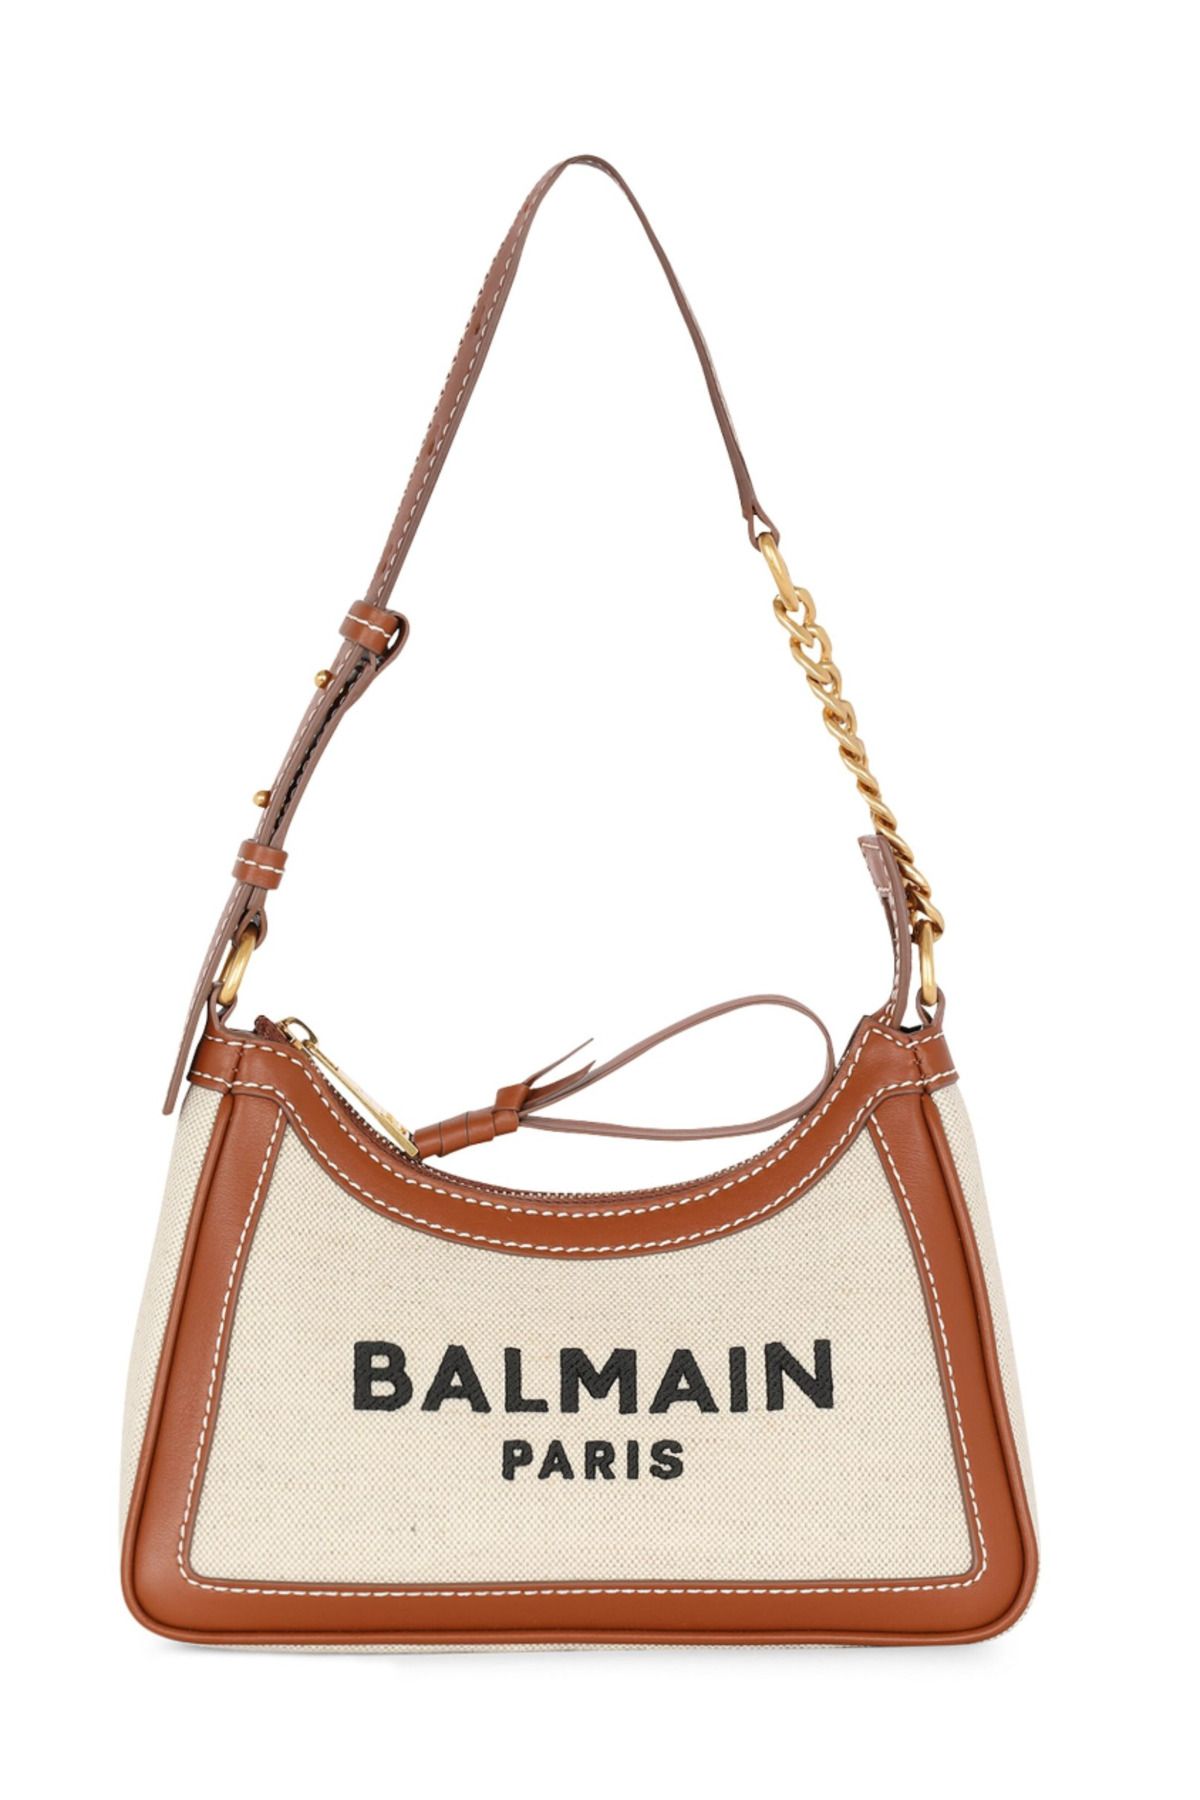 BALMAIN B-Army Canvas and Leather Shoulder Bag